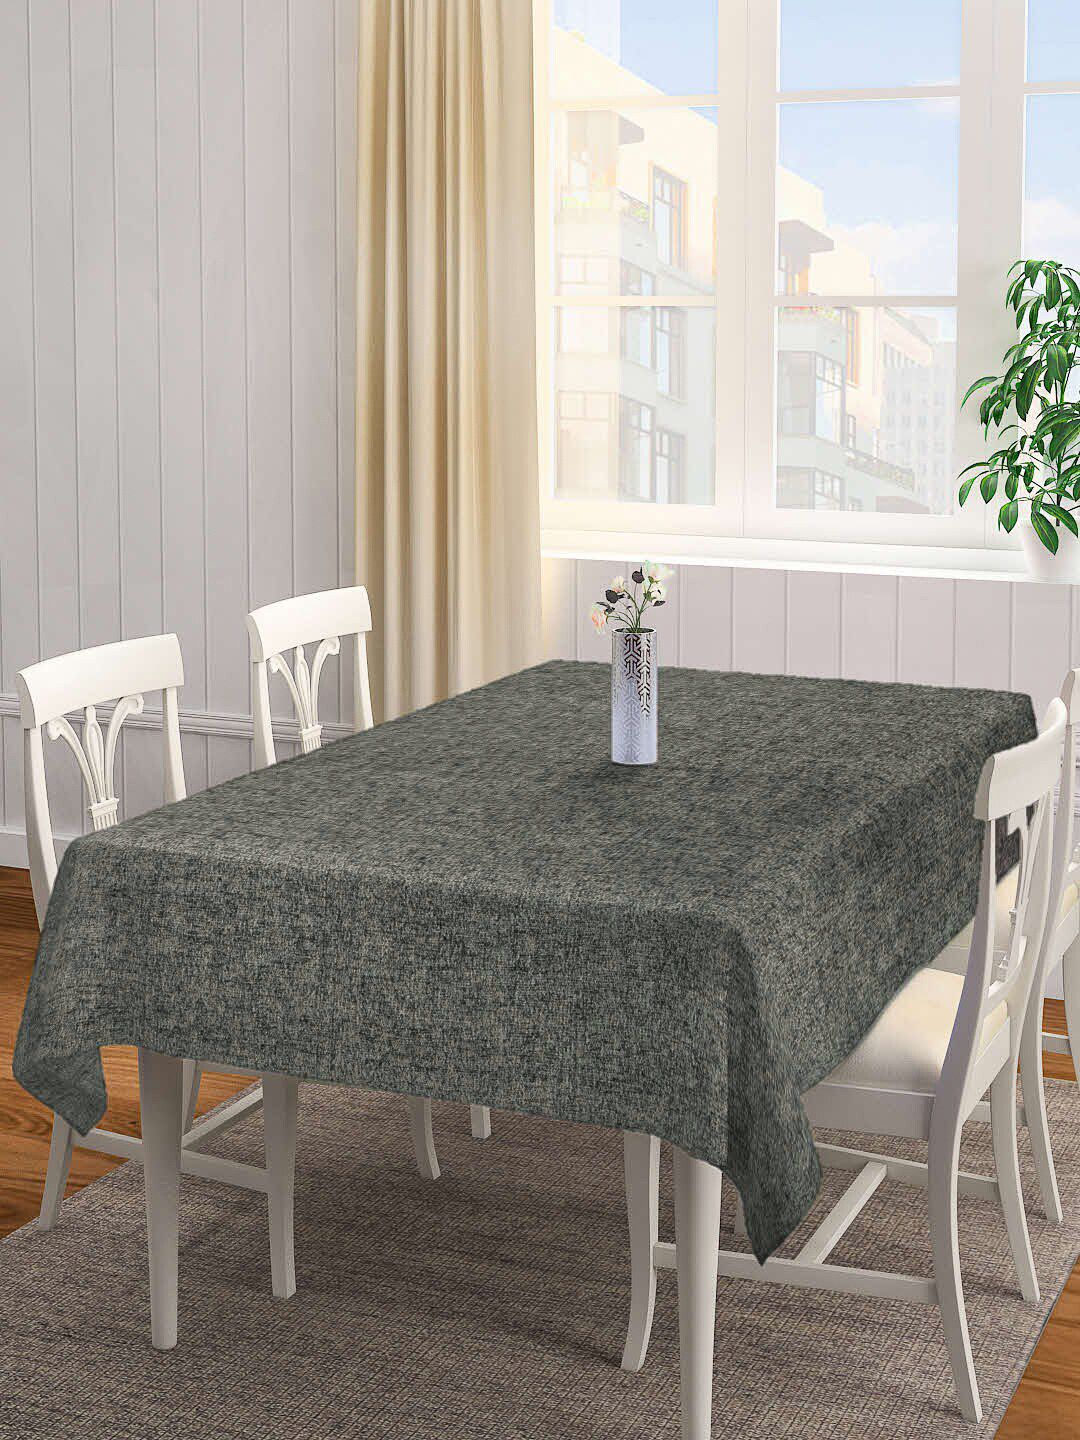 KLOTTHE 6 Seater Woven-Design Cotton Table Cover Price in India